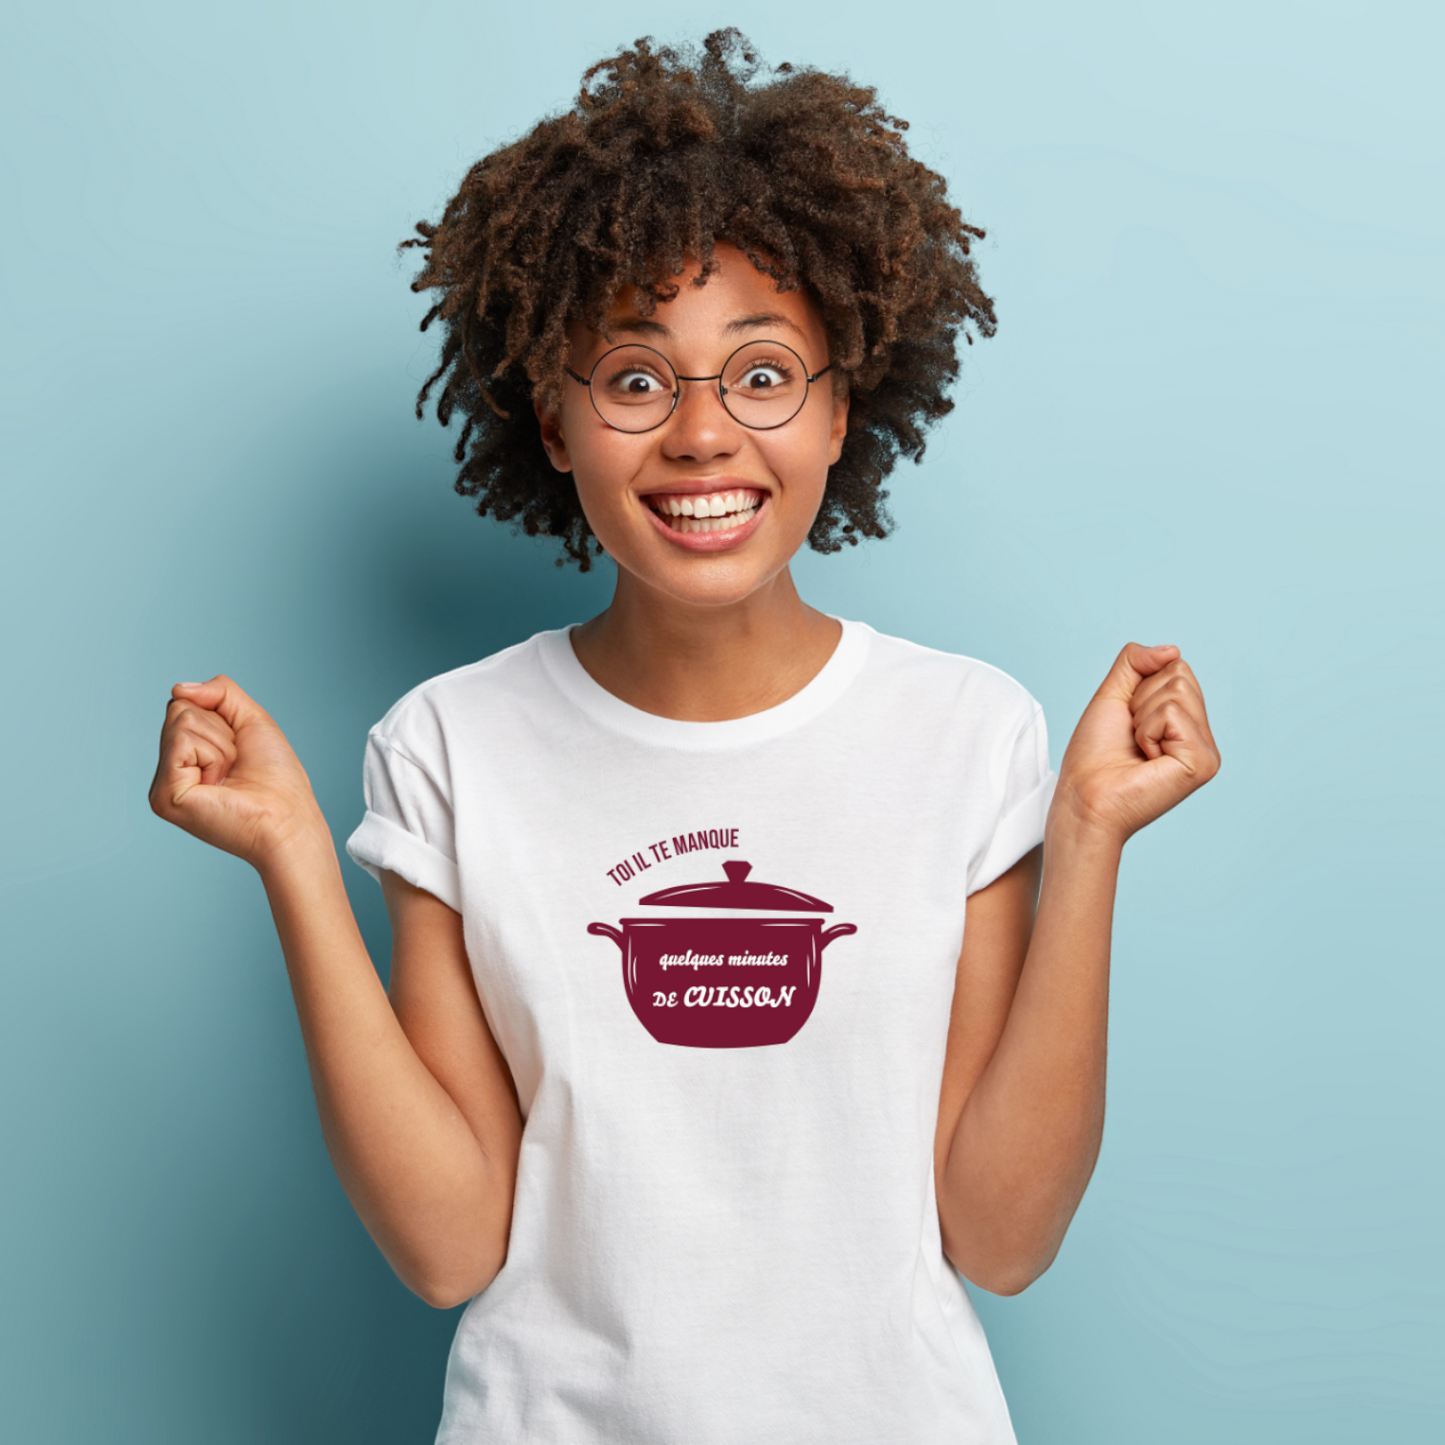 Women's T-shirt "You're missing a few minutes of cooking"